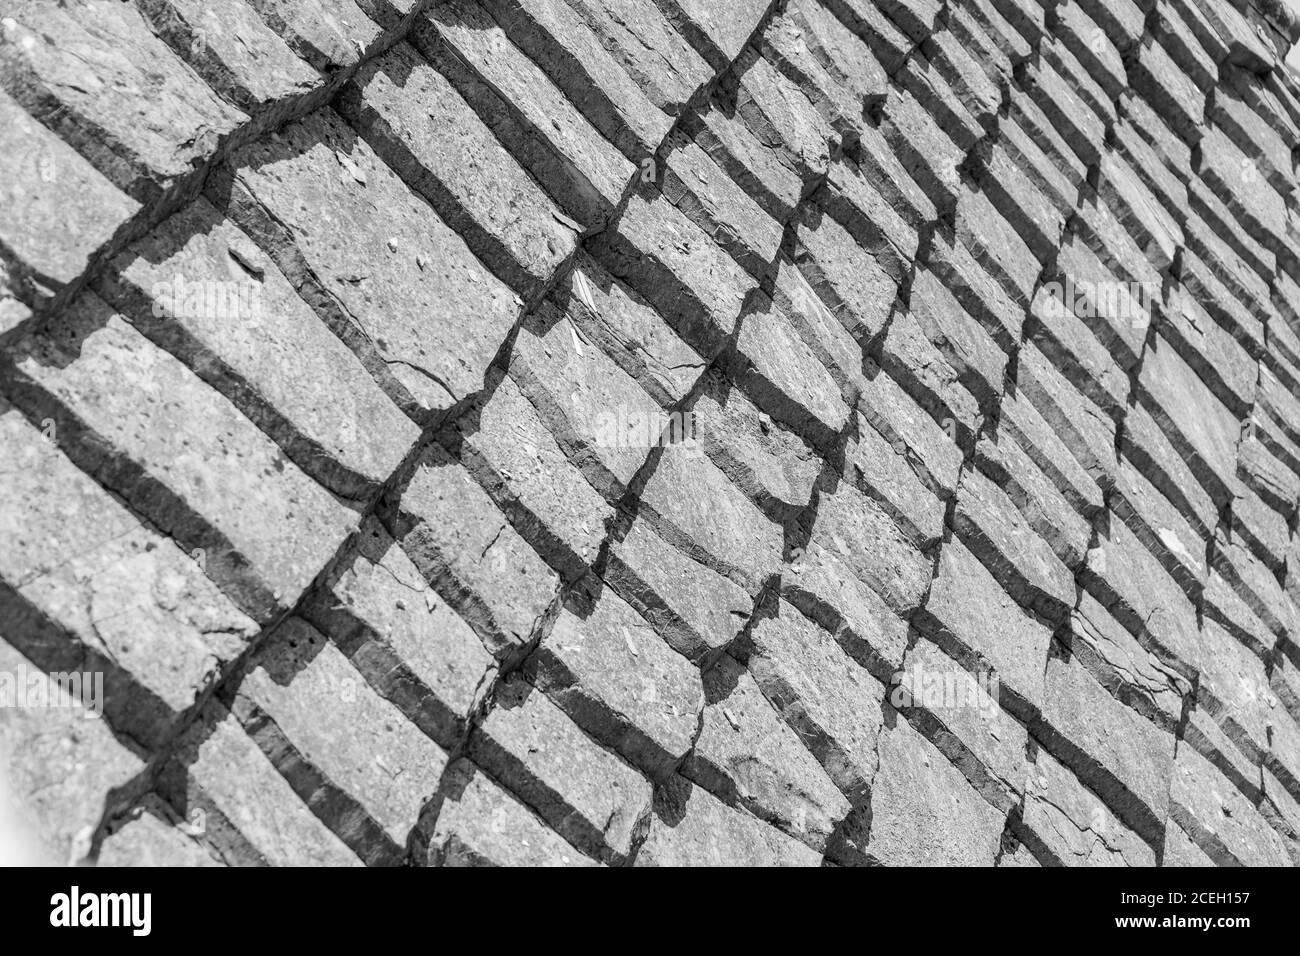 MOSTAR, BOSNIA HERZEGOVINA - 2017 AUGUST 16. Close up of a stone tiles on a house roof in the city of Mostar. Stock Photo